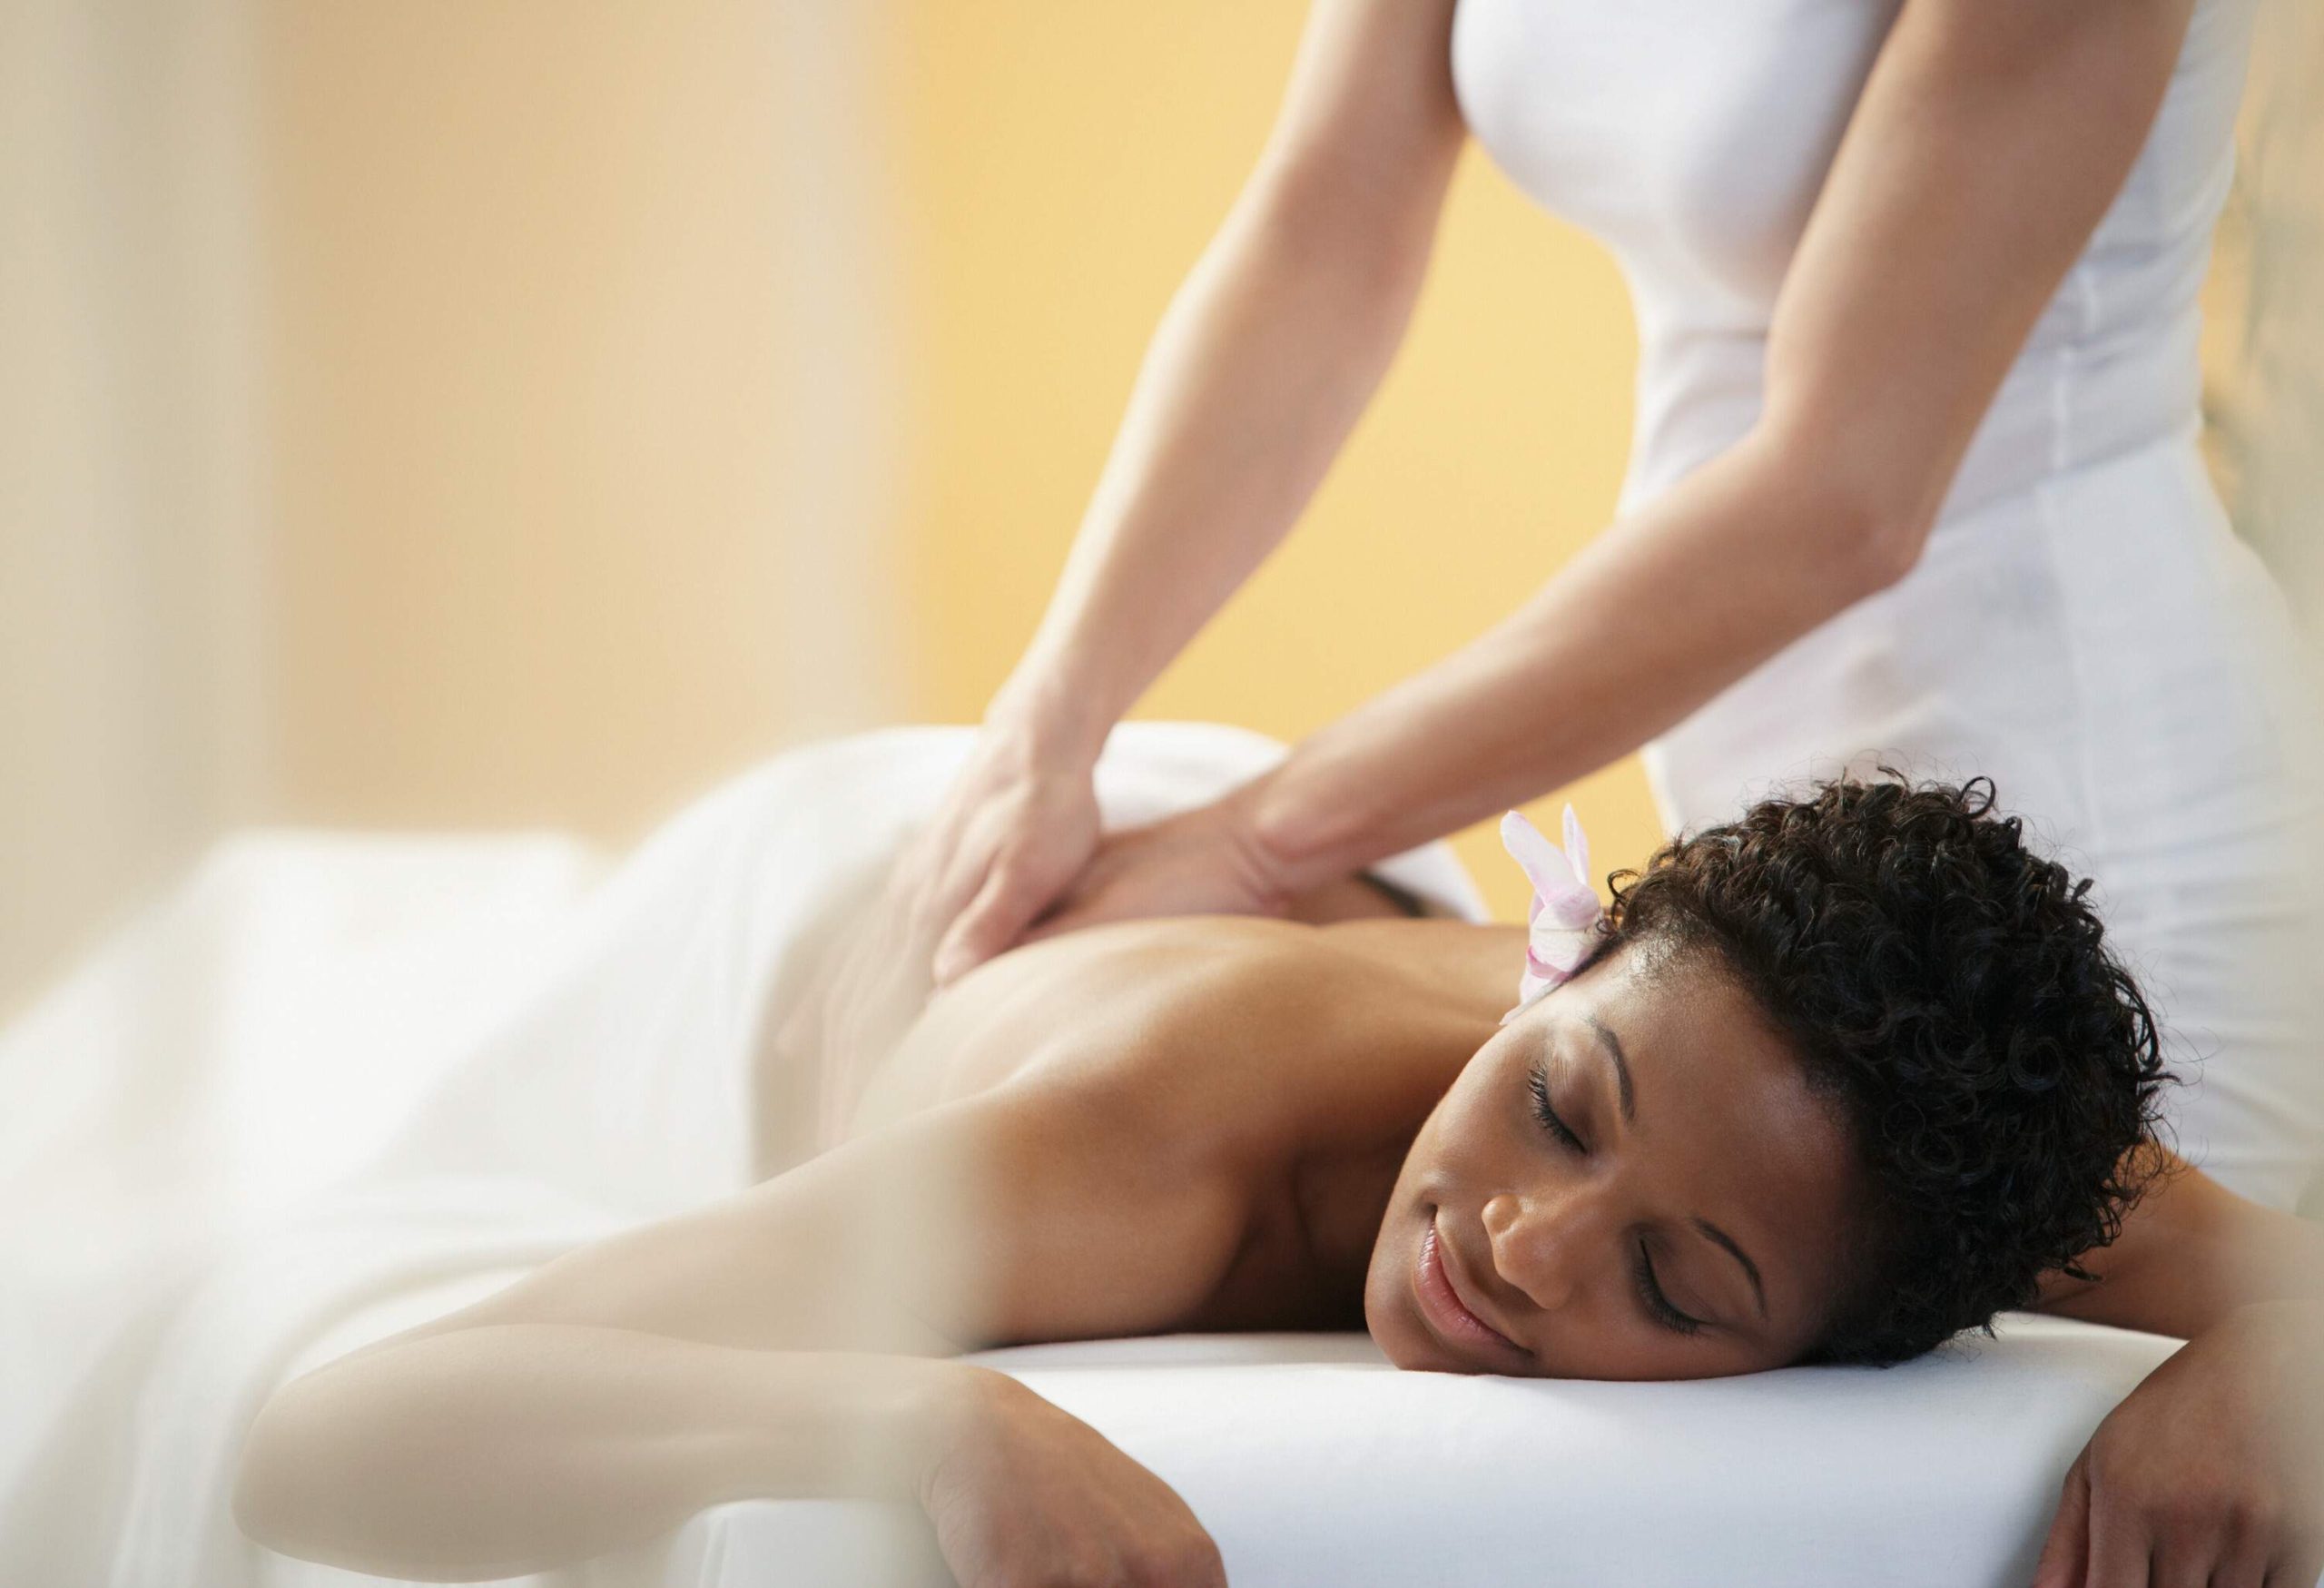 A woman lies on a spa bed with her eyes closed while receiving a back massage.